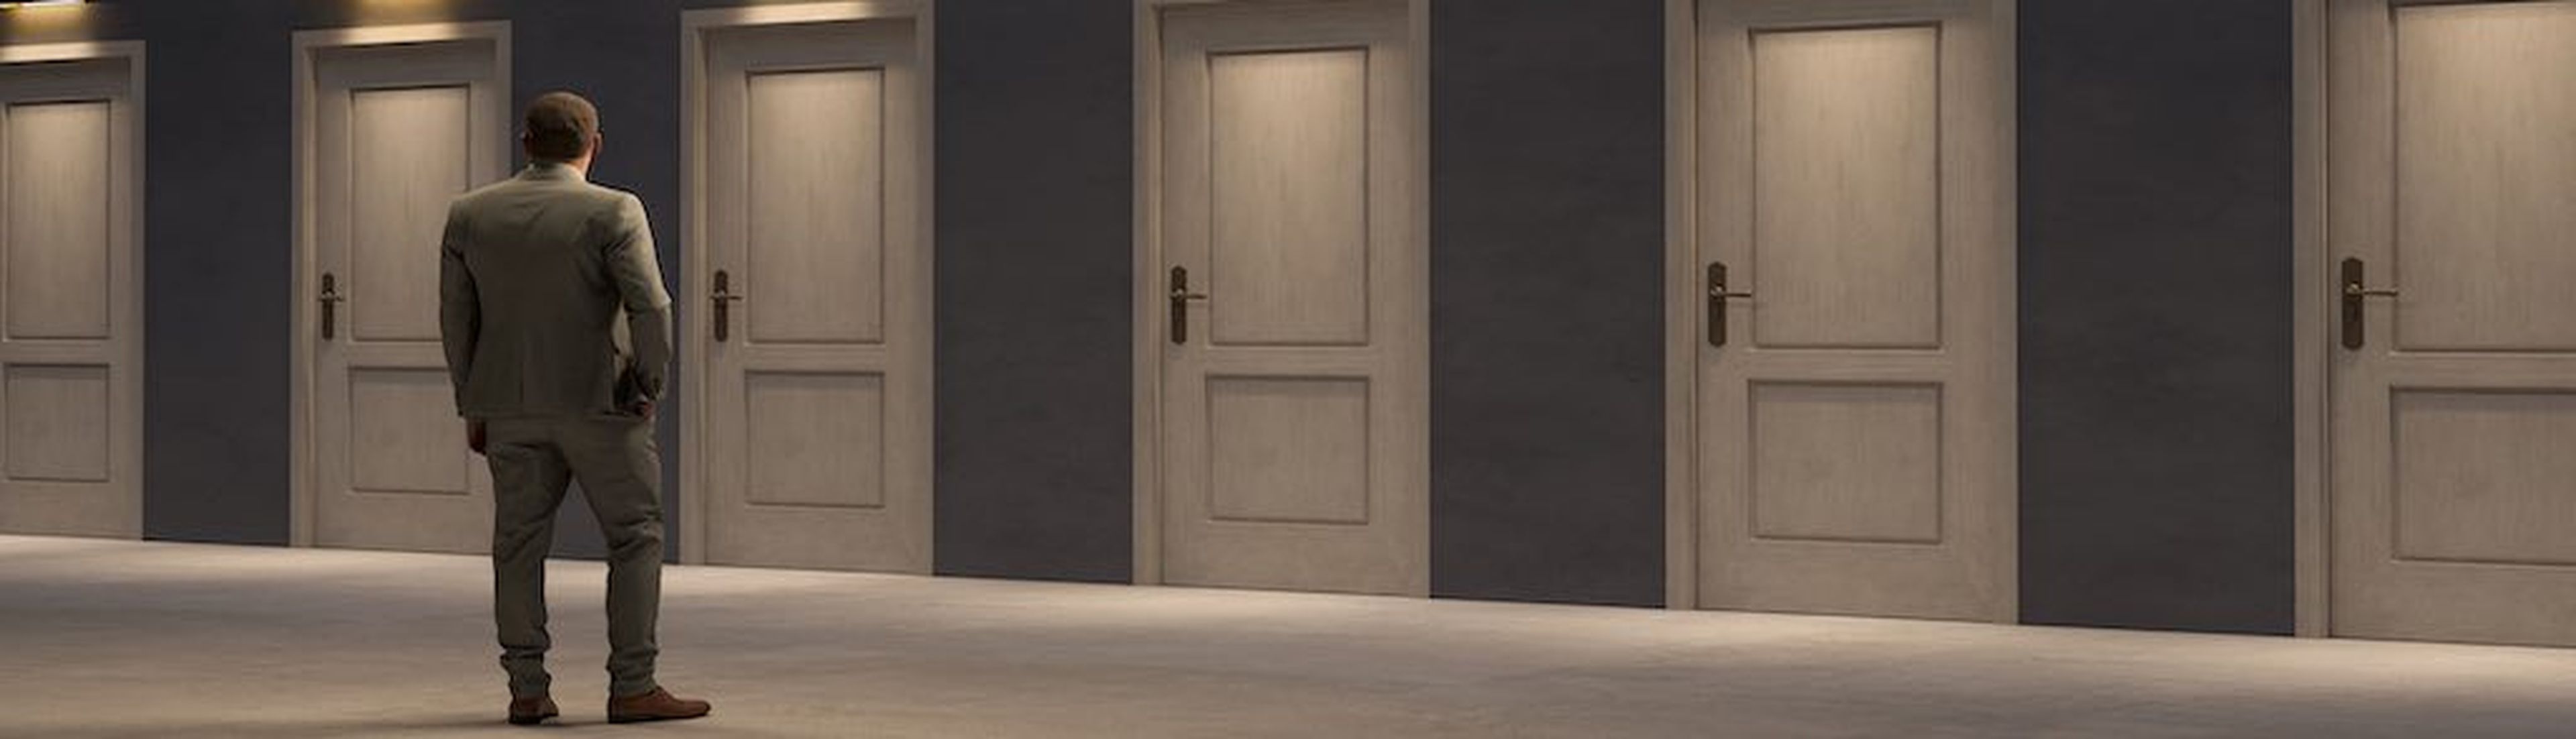 Too many closed doors, too many options. Business man looking for the right door to exit, 3D &#8211; Computer generated image.